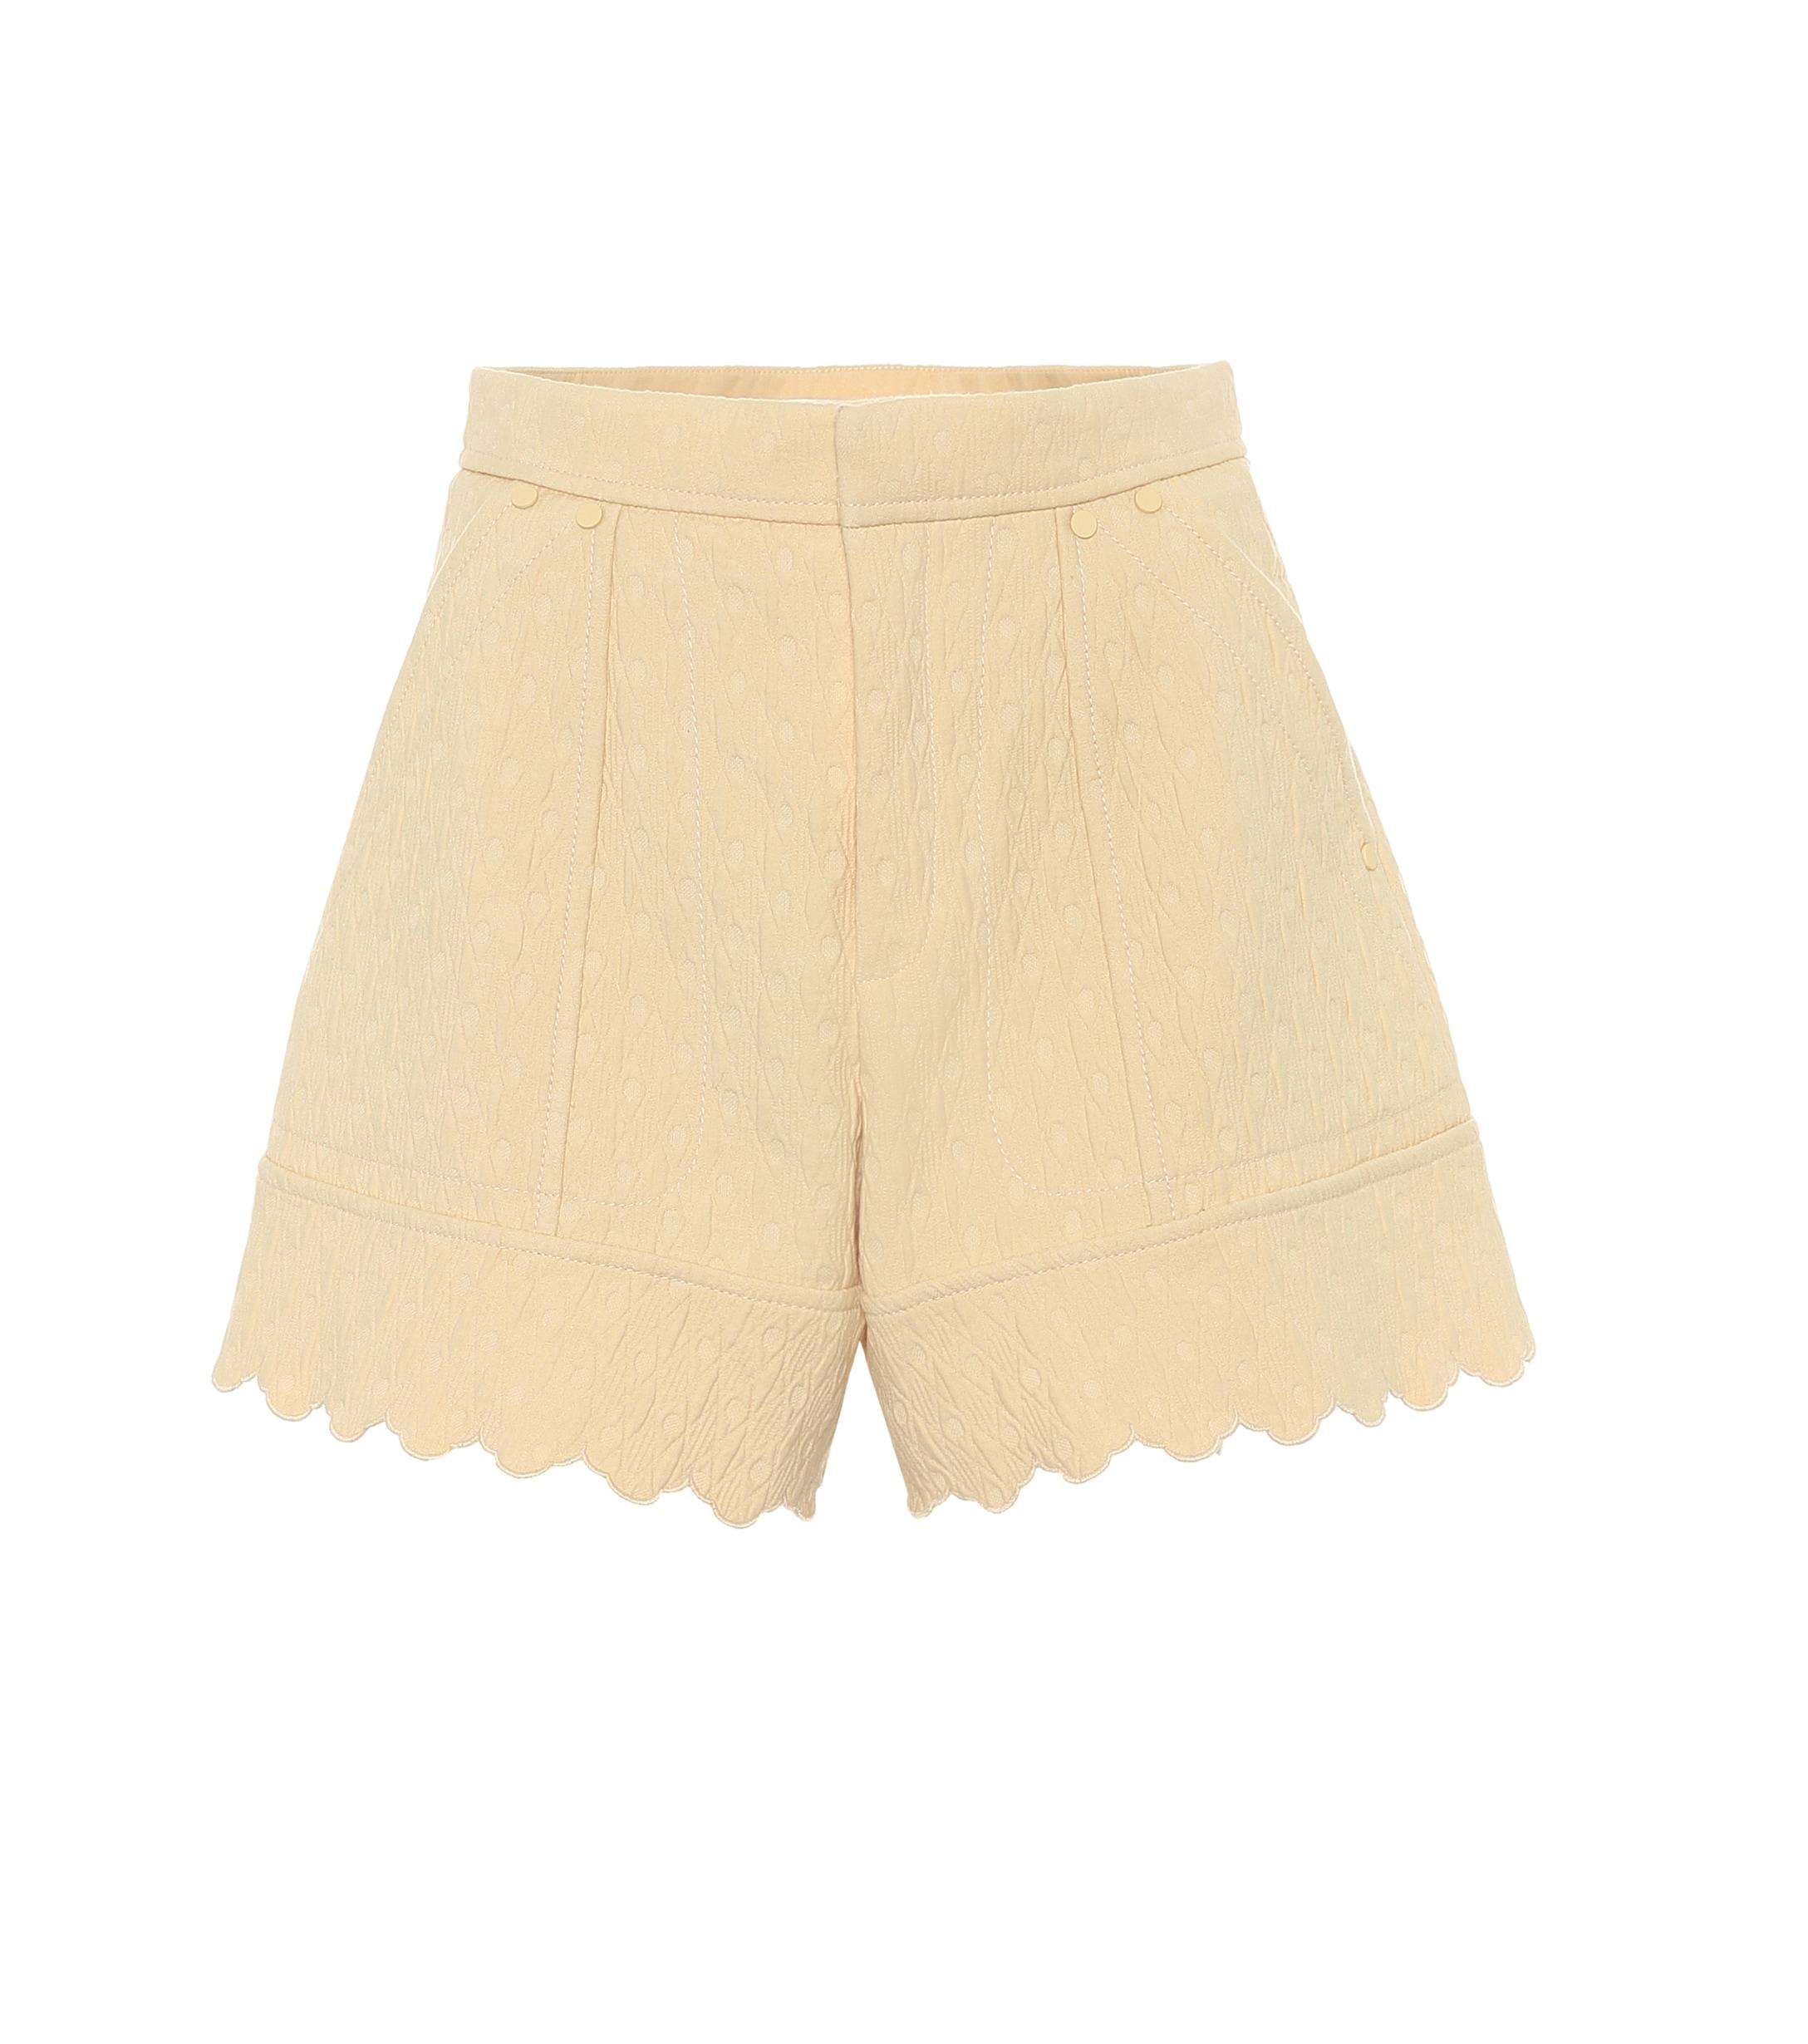 Chloé Quilted Cotton Jacquard Shorts in Beige (Natural) - Lyst